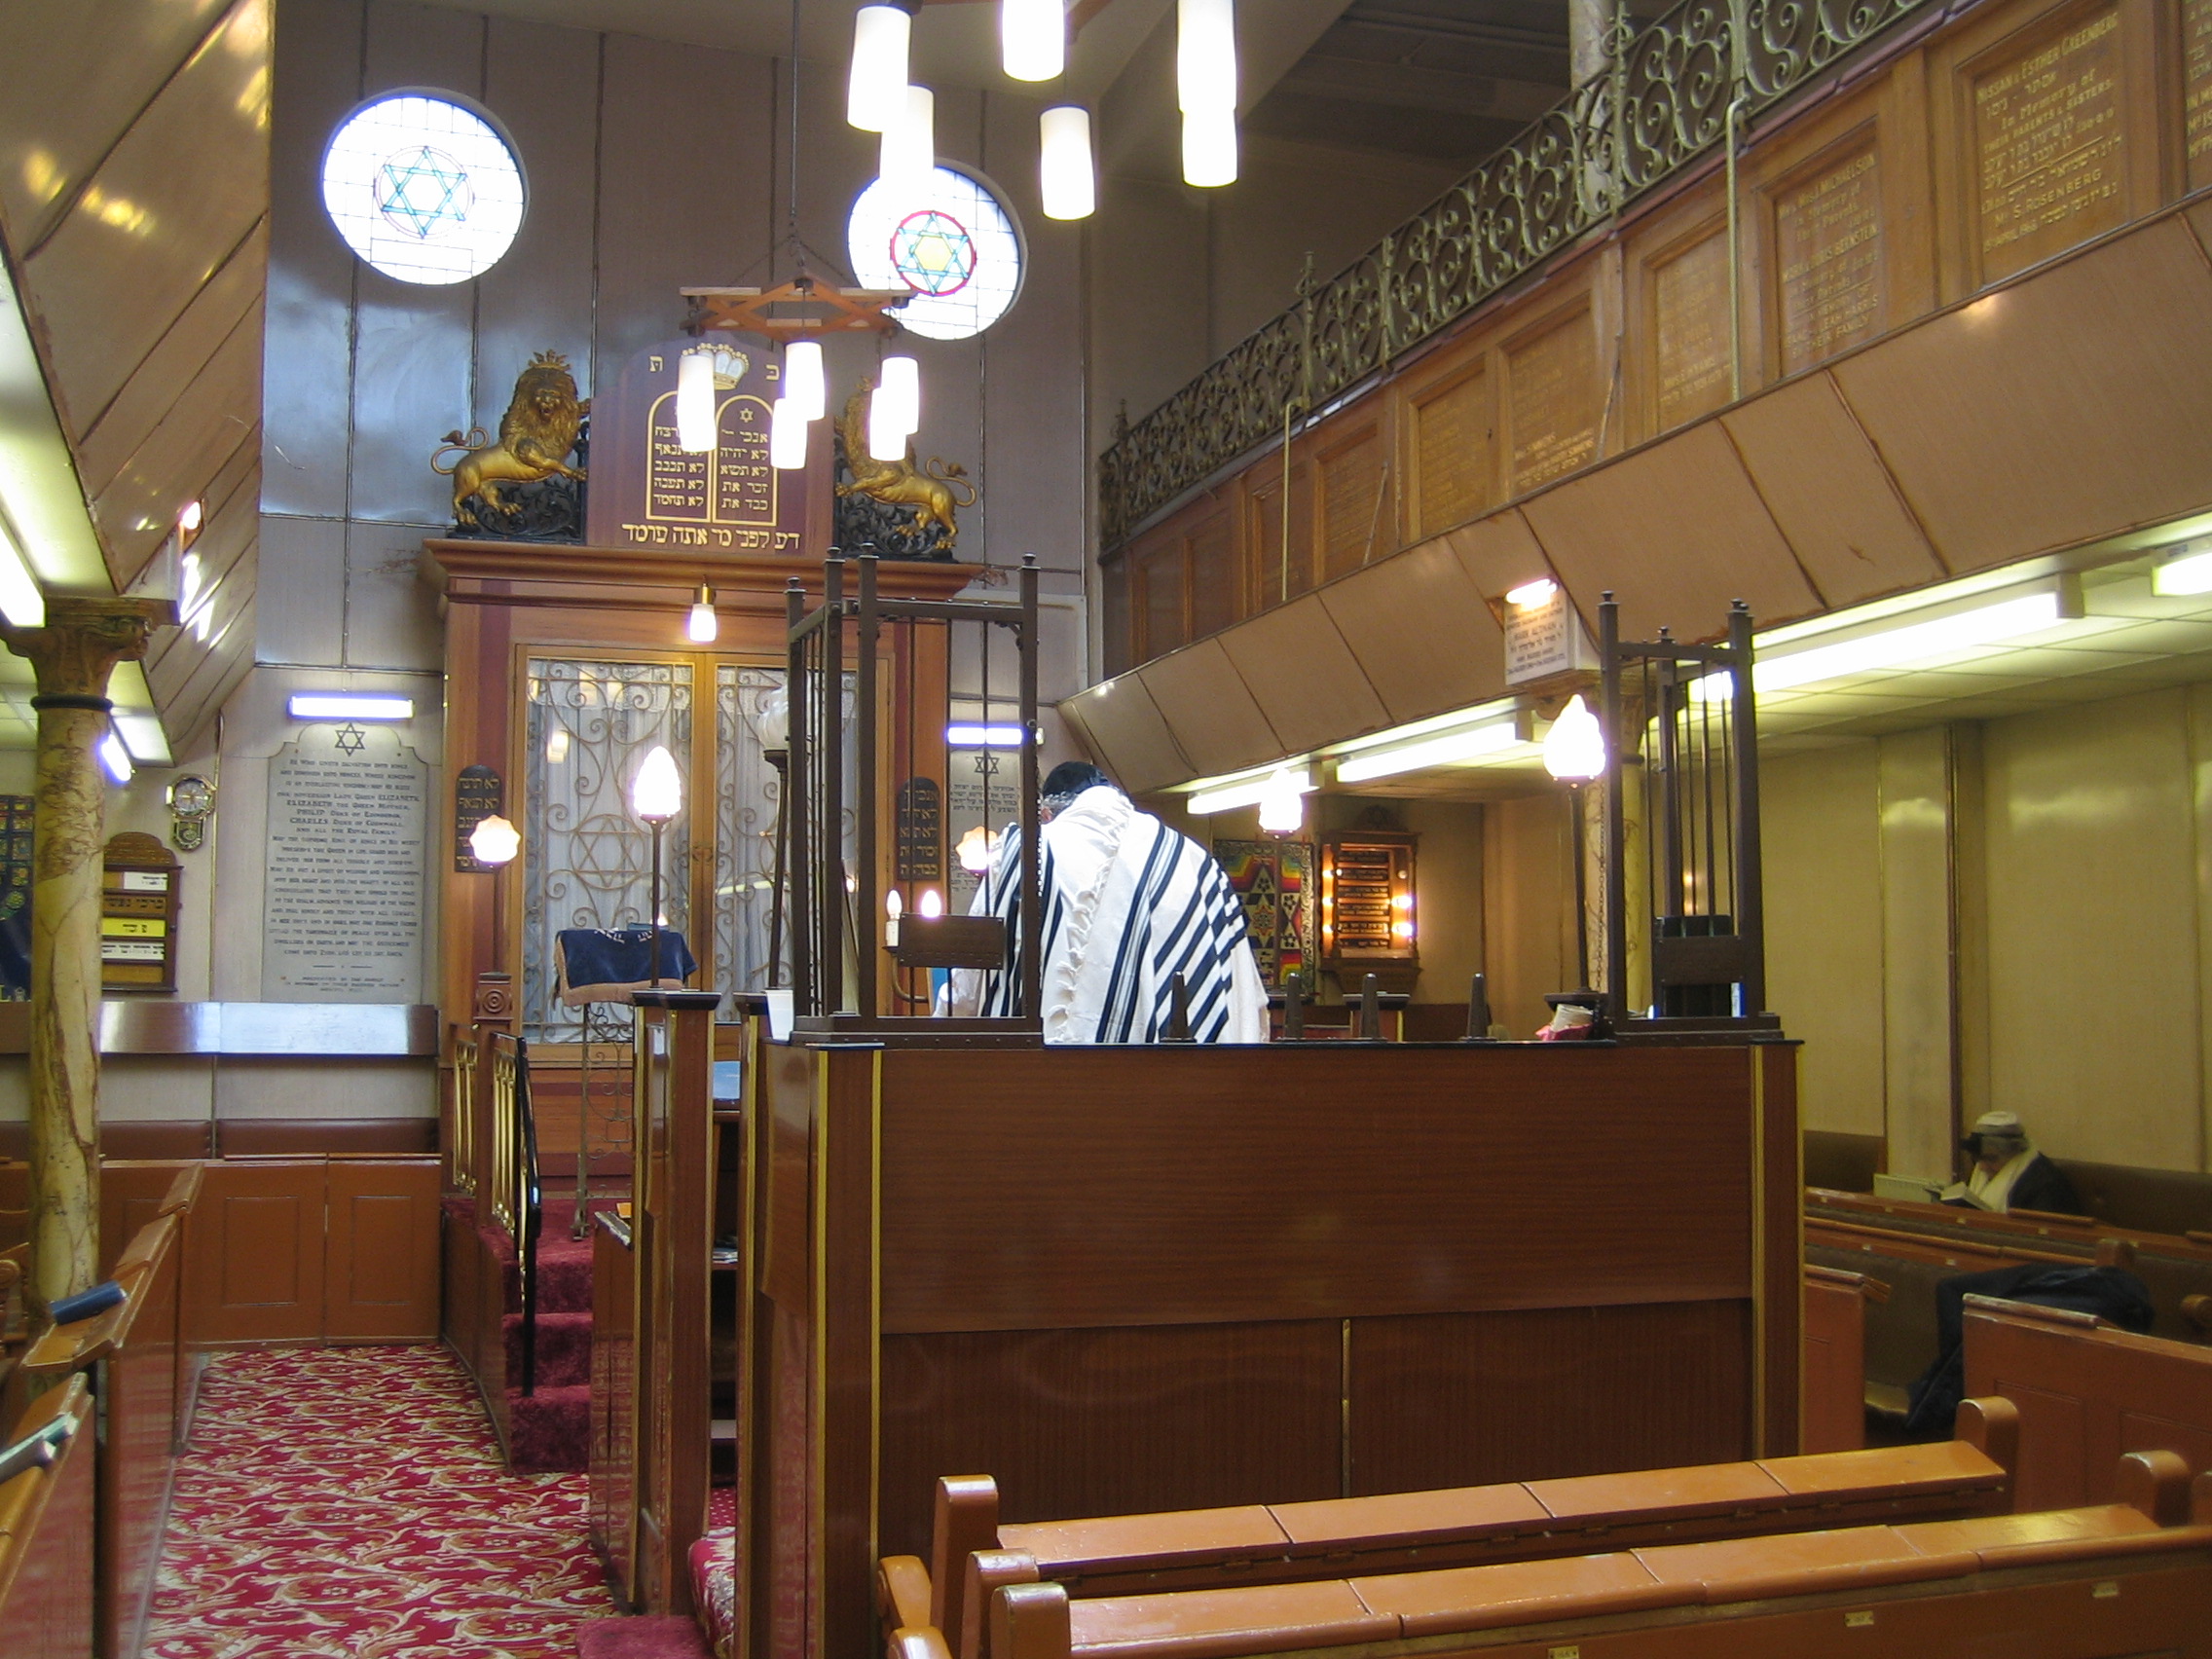 Fieldgate Street synagogue interior looking towards the Ark